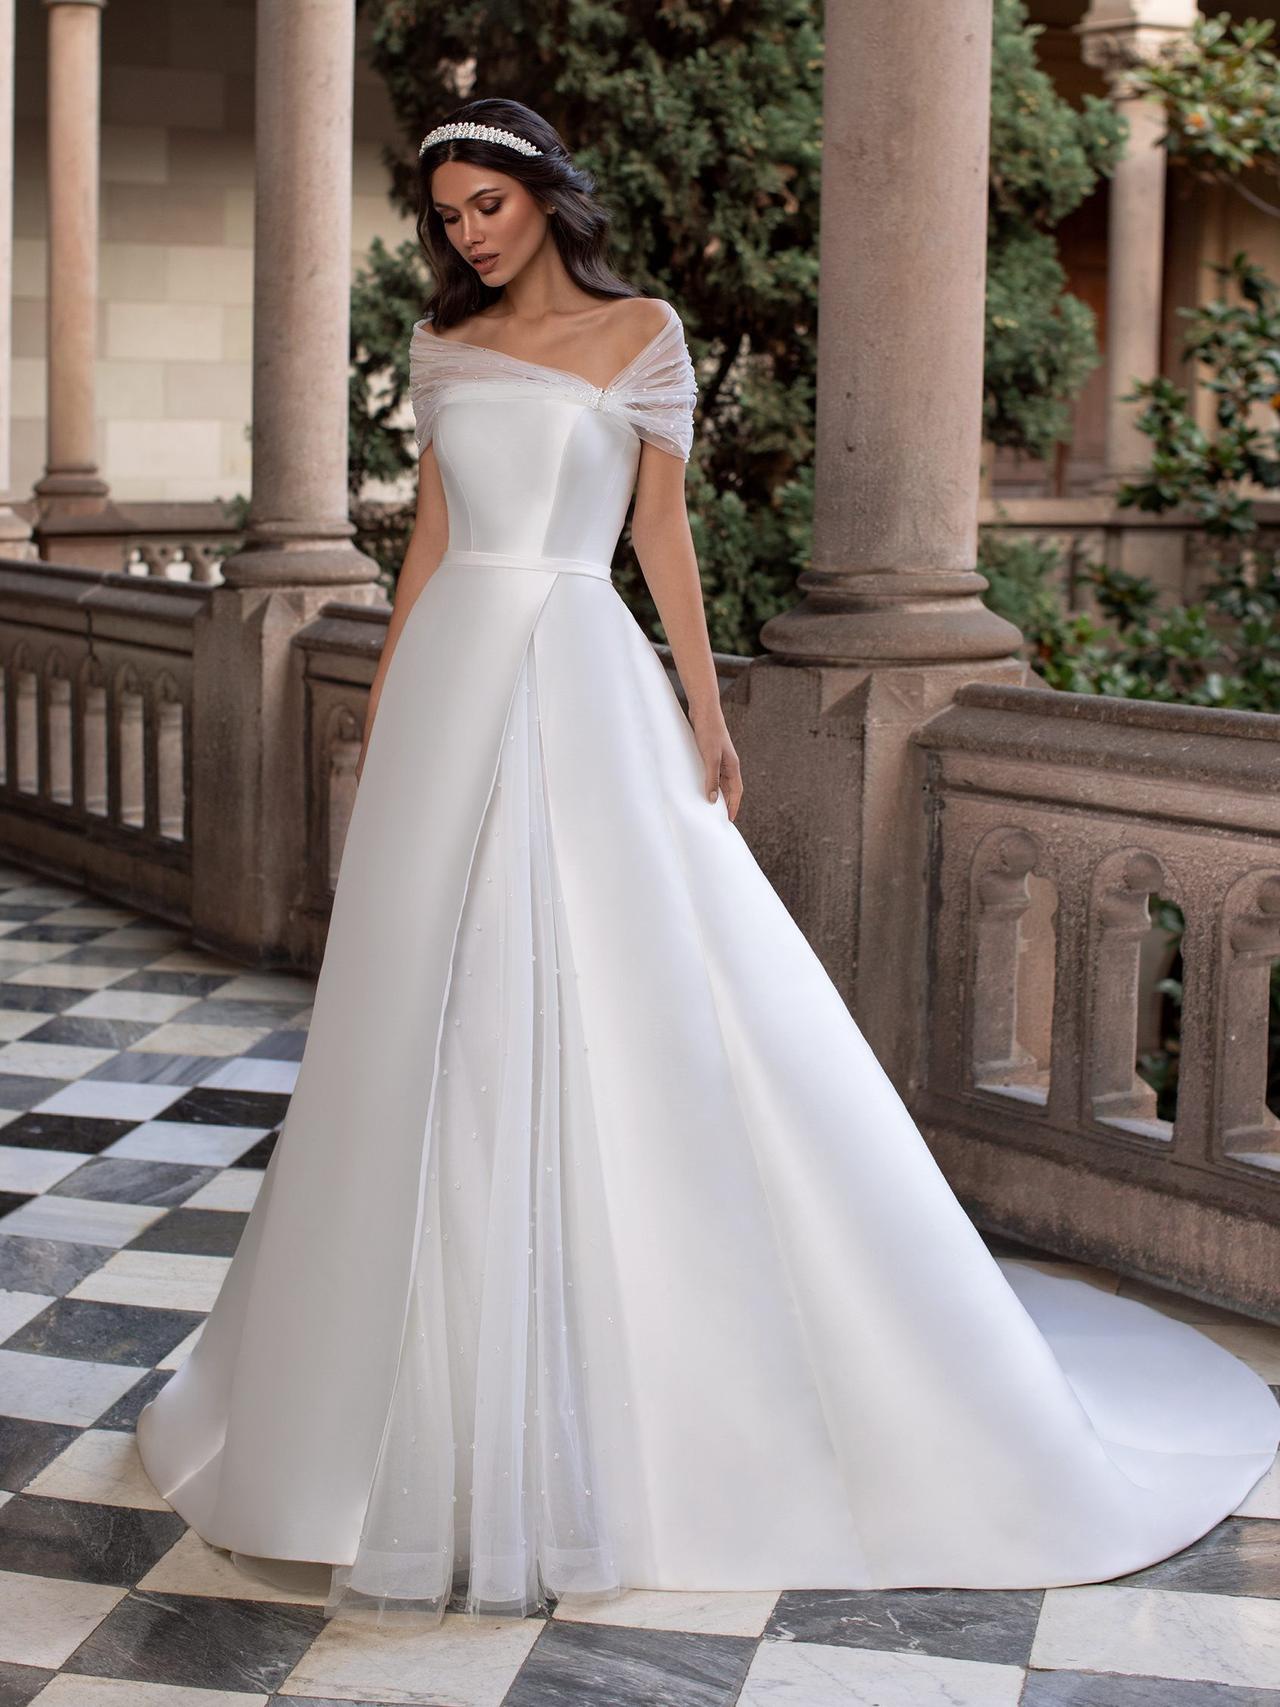 Vintage-Inspired Bridal Gowns for the Winter Bride - Bellatory